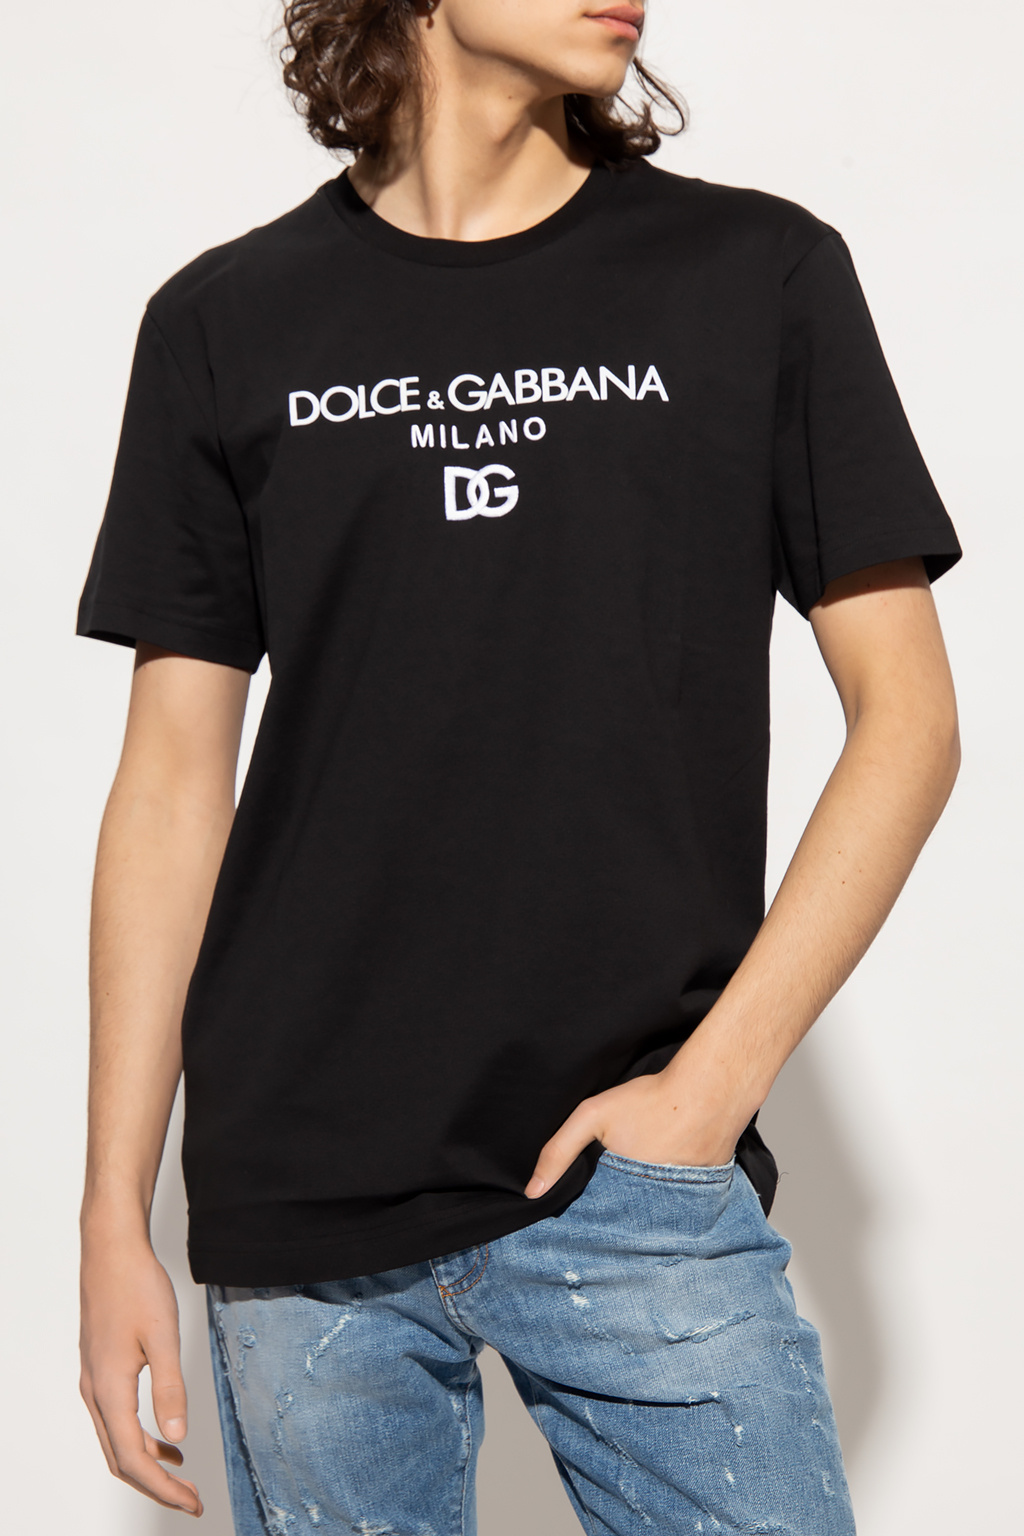 dolce gabbana kids flat sandals with bow item T-shirt with logo